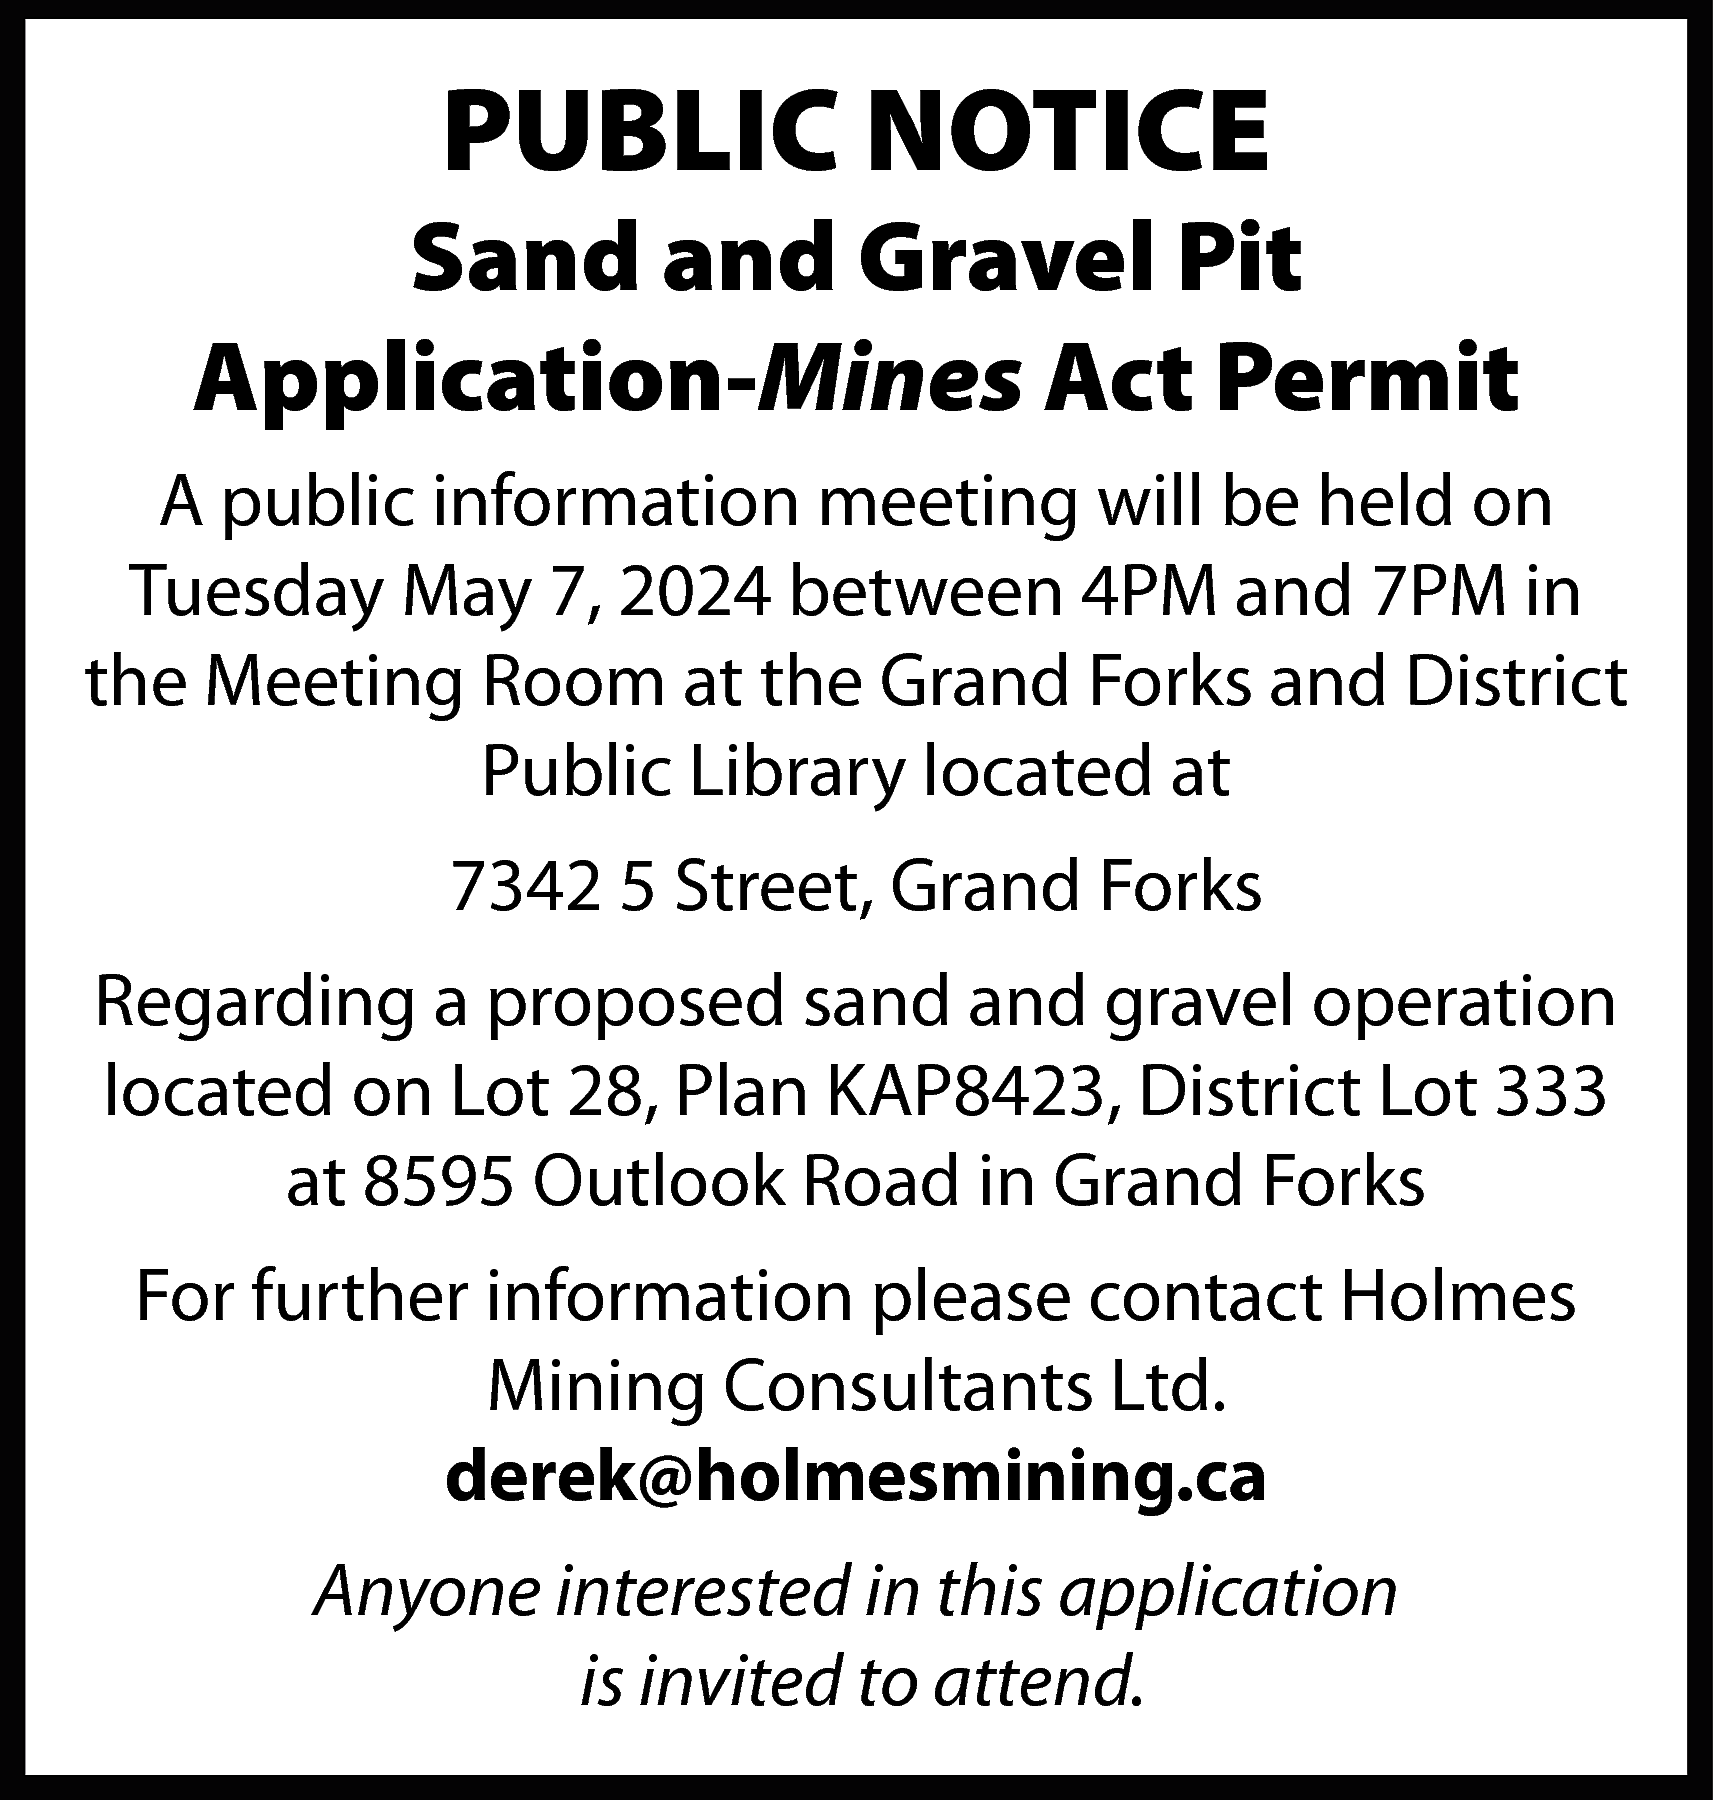 PUBLIC NOTICE <br> <br>Sand and  PUBLIC NOTICE    Sand and Gravel Pit  Application-Mines Act Permit  A public information meeting will be held on  Tuesday May 7, 2024 between 4PM and 7PM in  the Meeting Room at the Grand Forks and District  Public Library located at  7342 5 Street, Grand Forks  Regarding a proposed sand and gravel operation  located on Lot 28, Plan KAP8423, District Lot 333  at 8595 Outlook Road in Grand Forks  For further information please contact Holmes  Mining Consultants Ltd.  derek@holmesmining.ca  Anyone interested in this application  is invited to attend.    